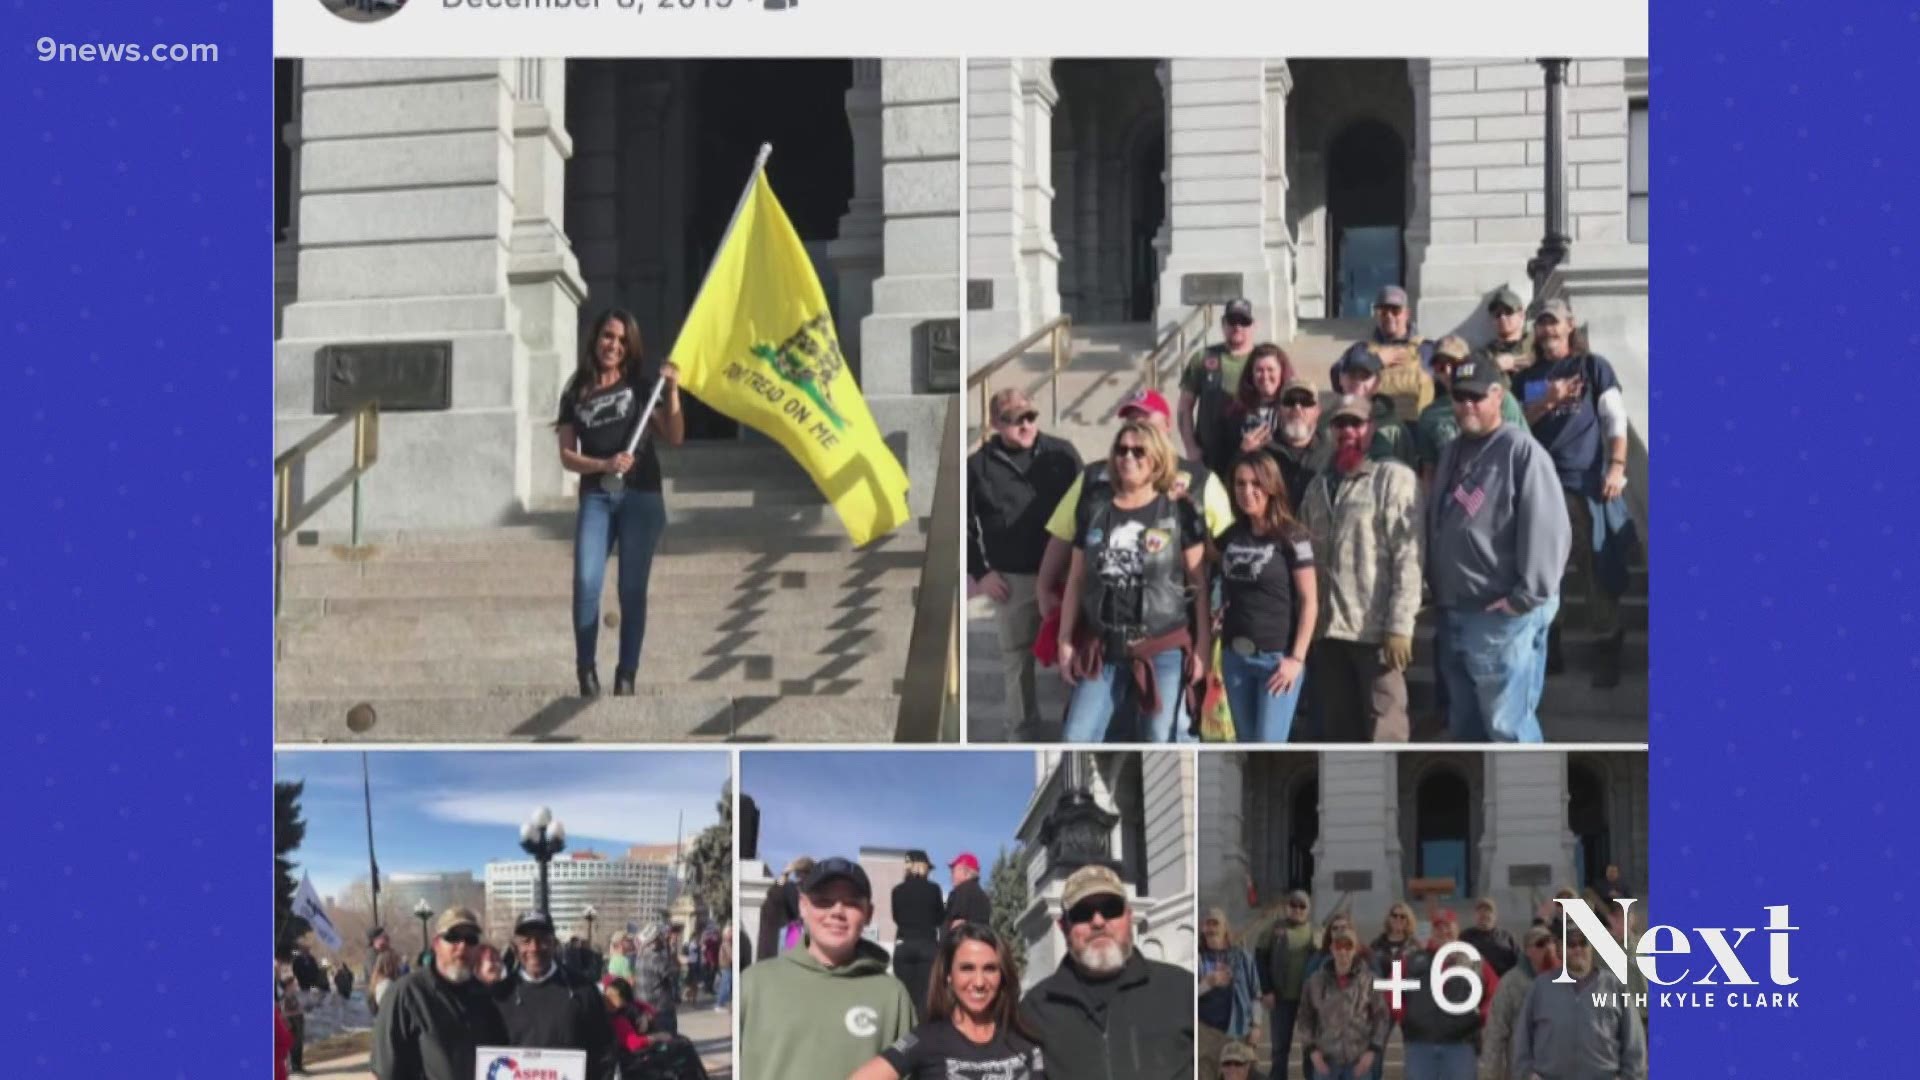 Colorado Congresswoman Lauren Boebert (R) bragged about the militia. And this month, her supporters stormed the Capitol. She's scrubbed away evidence of those ties.